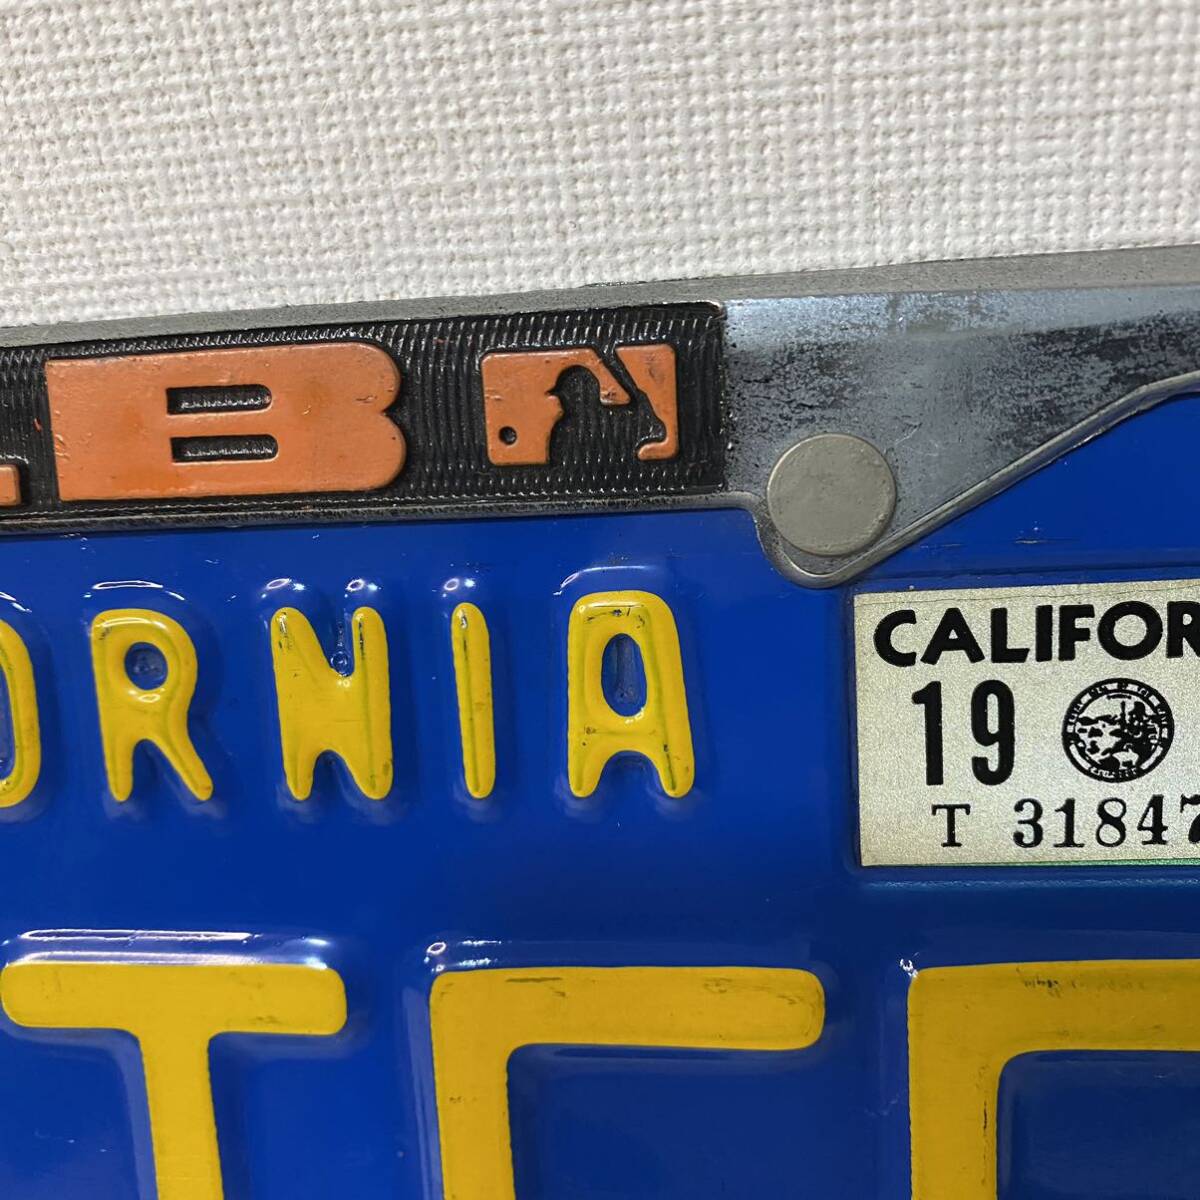  abroad direct import San Francisco Giants number plate blue 1979 year America Ame car equipment ornament blue interior decoration display miscellaneous goods A52